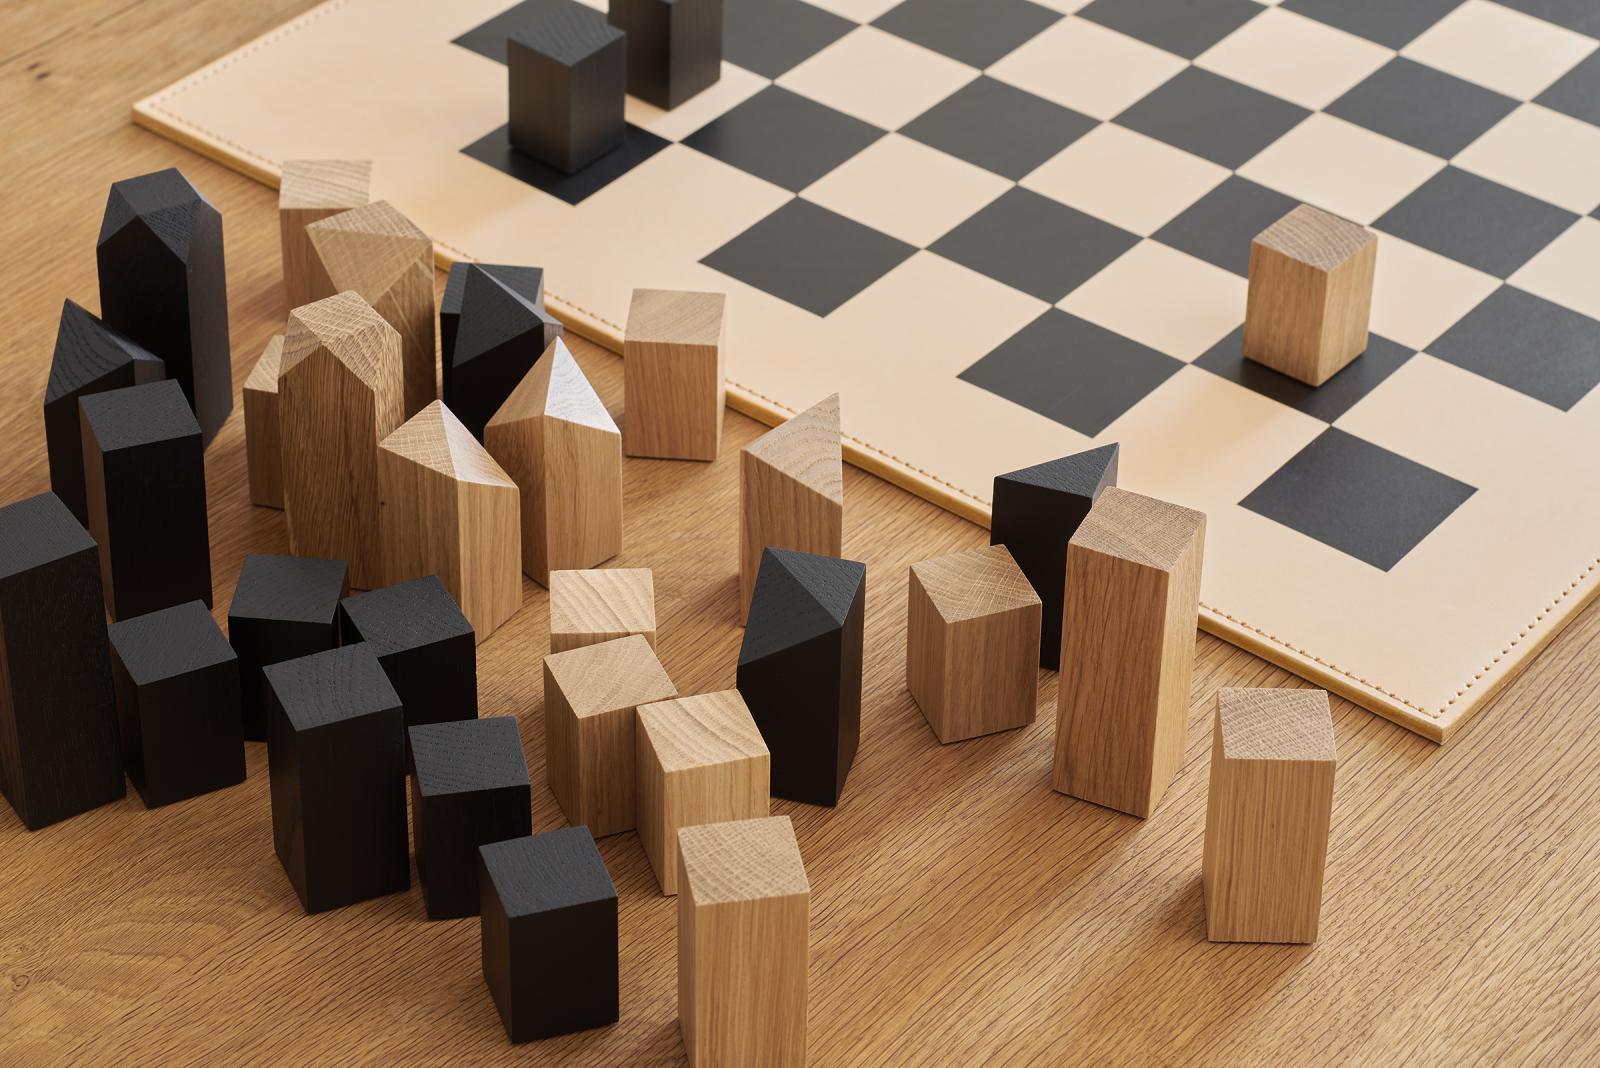 The distinct outline of NONA chess figures illustrate a decisive cut and
minimum design intervention to create each character.Each figure is
inspired by the moves it can make. NONA is named in appreciation of
the first woman to be awarded the